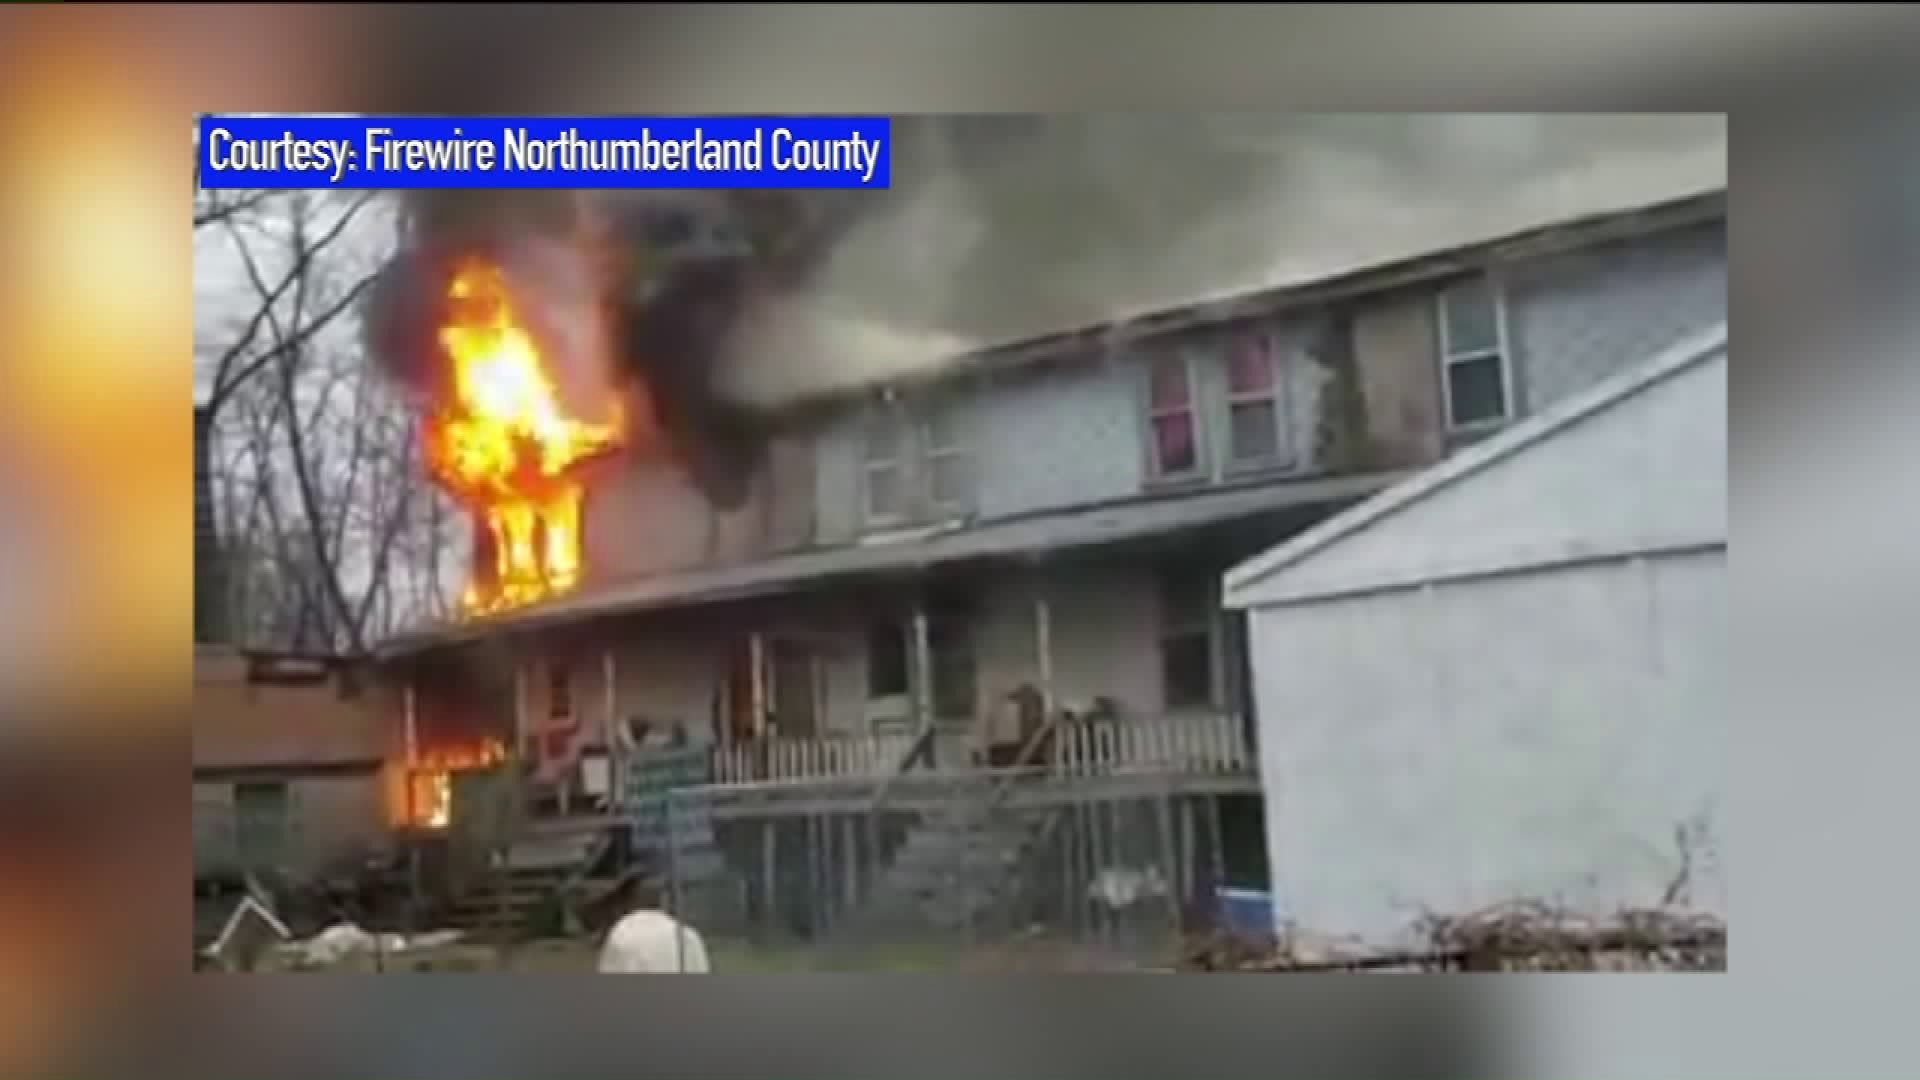 Fire Forces 11 from Row Homes in Northumberland County